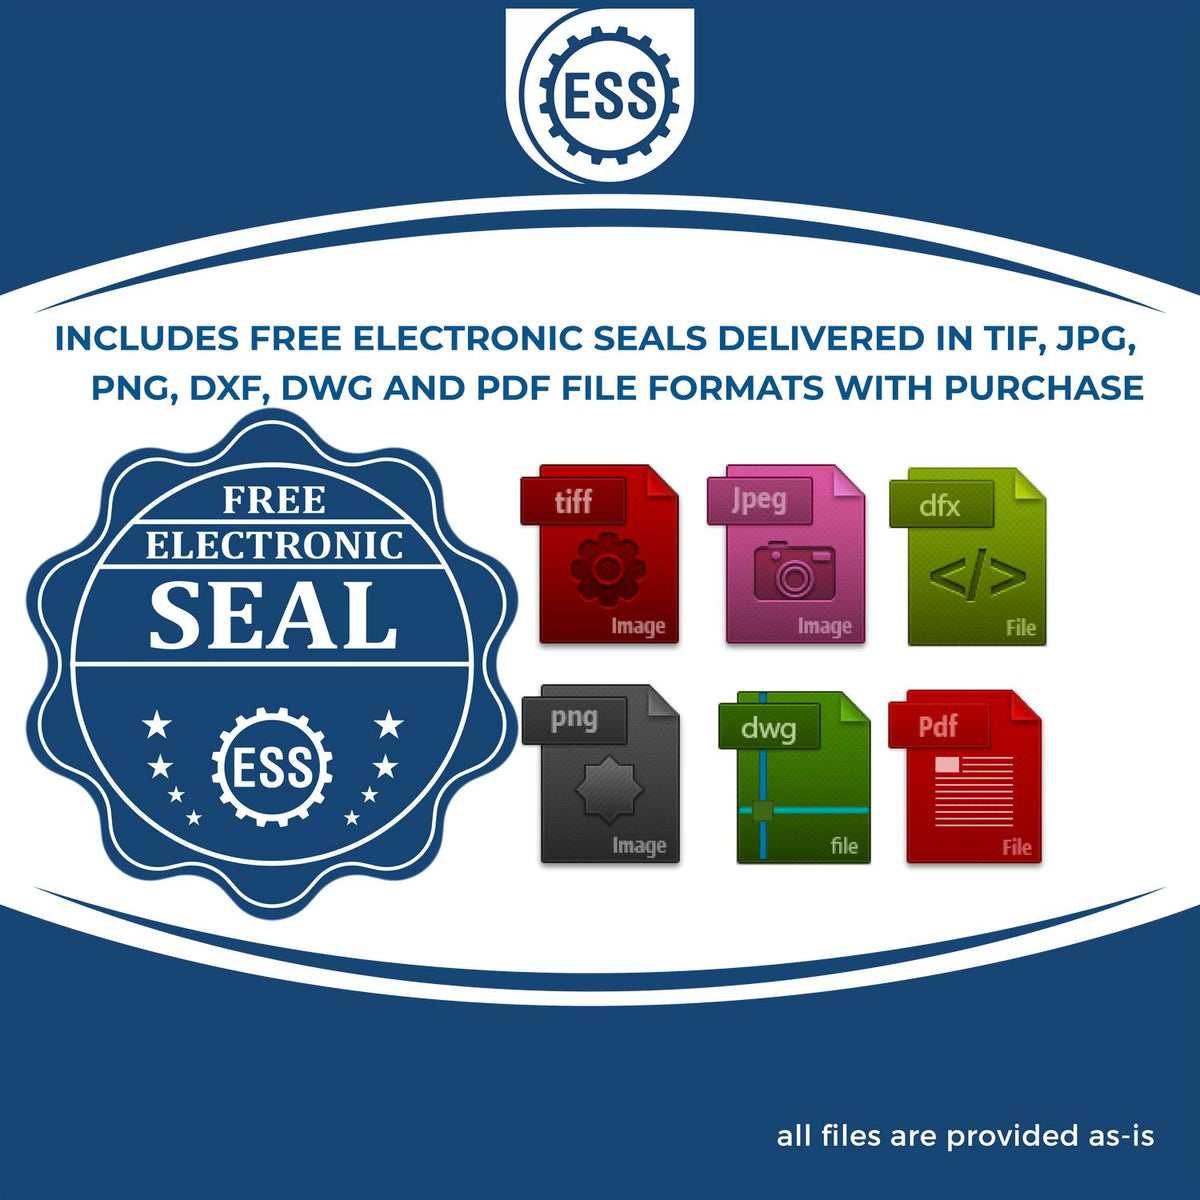 An infographic for the free electronic seal for the Long Reach District of Columbia PE Seal illustrating the different file type icons such as DXF, DWG, TIF, JPG and PNG.